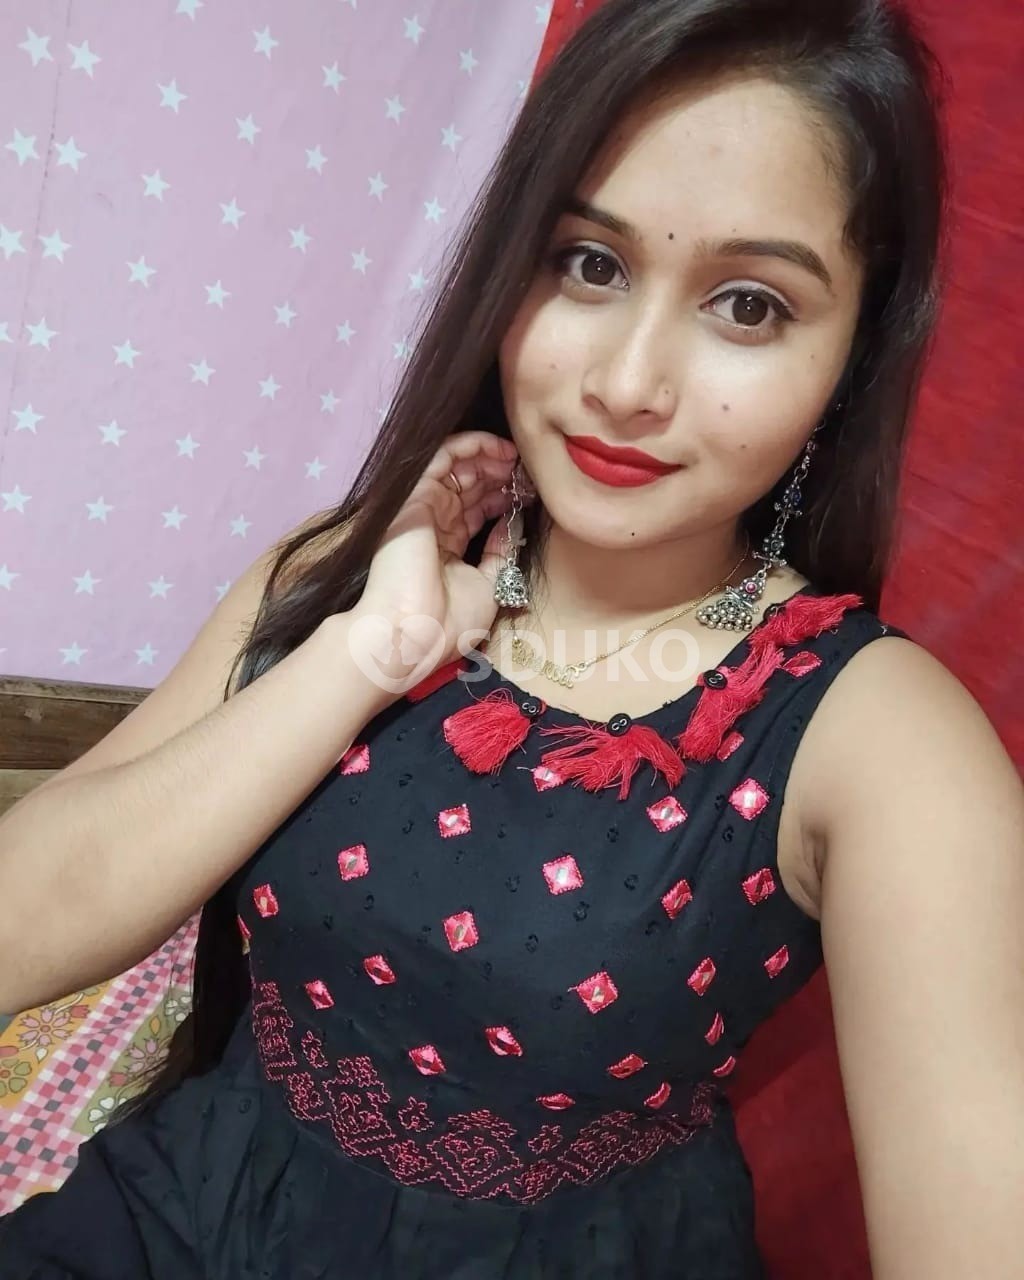 HITEC CITY DIRECT TODAY LOW PRICE BEST VIP GENUINE COLLEGE GIRL HOUSEWIFE AUNTIES AVAILABLE 100% SATISFACTION ANYTIME CA